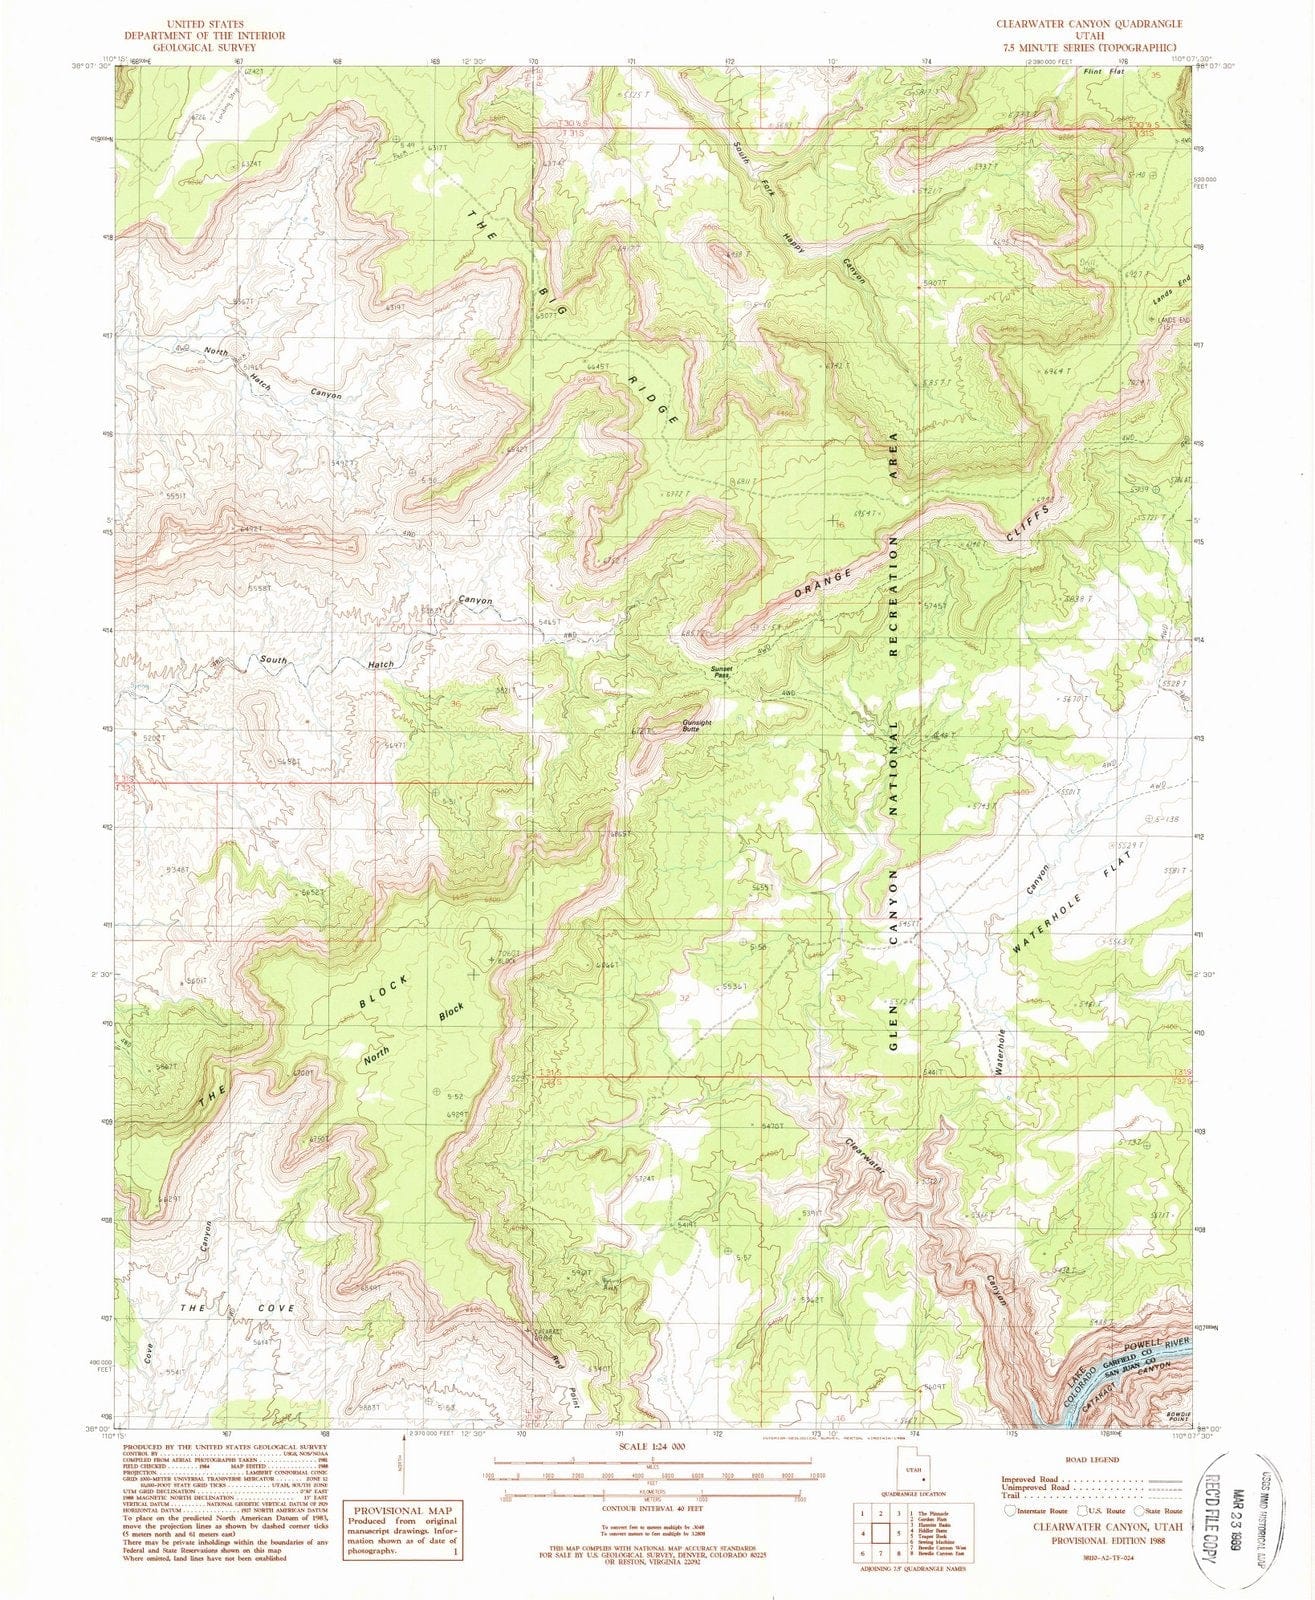 1988 Clearwater Canyon, UT - Utah - USGS Topographic Map